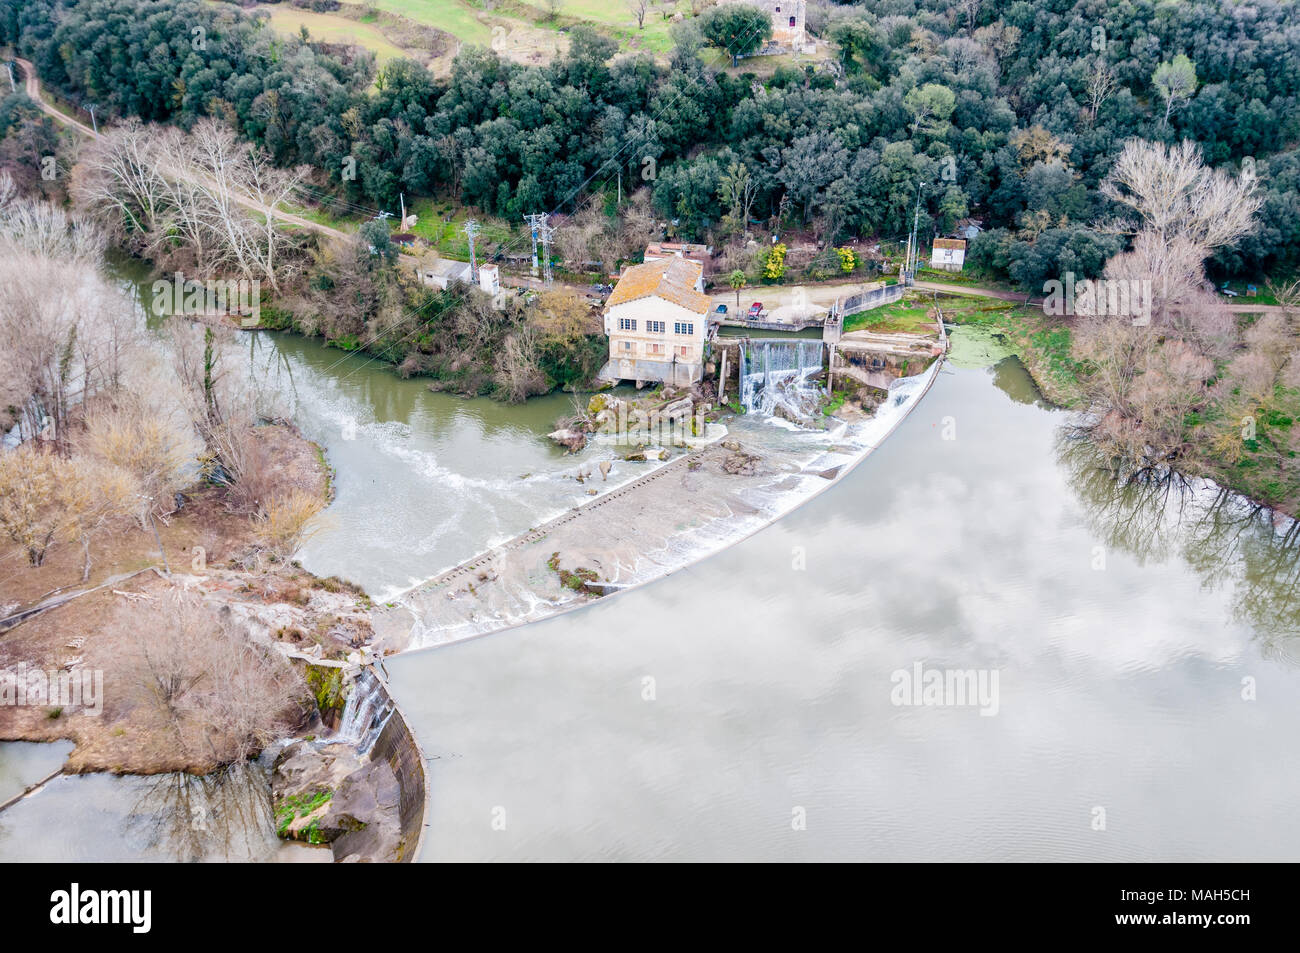 aerial view of water channel, dam and hydroelectric power station Stock Photo